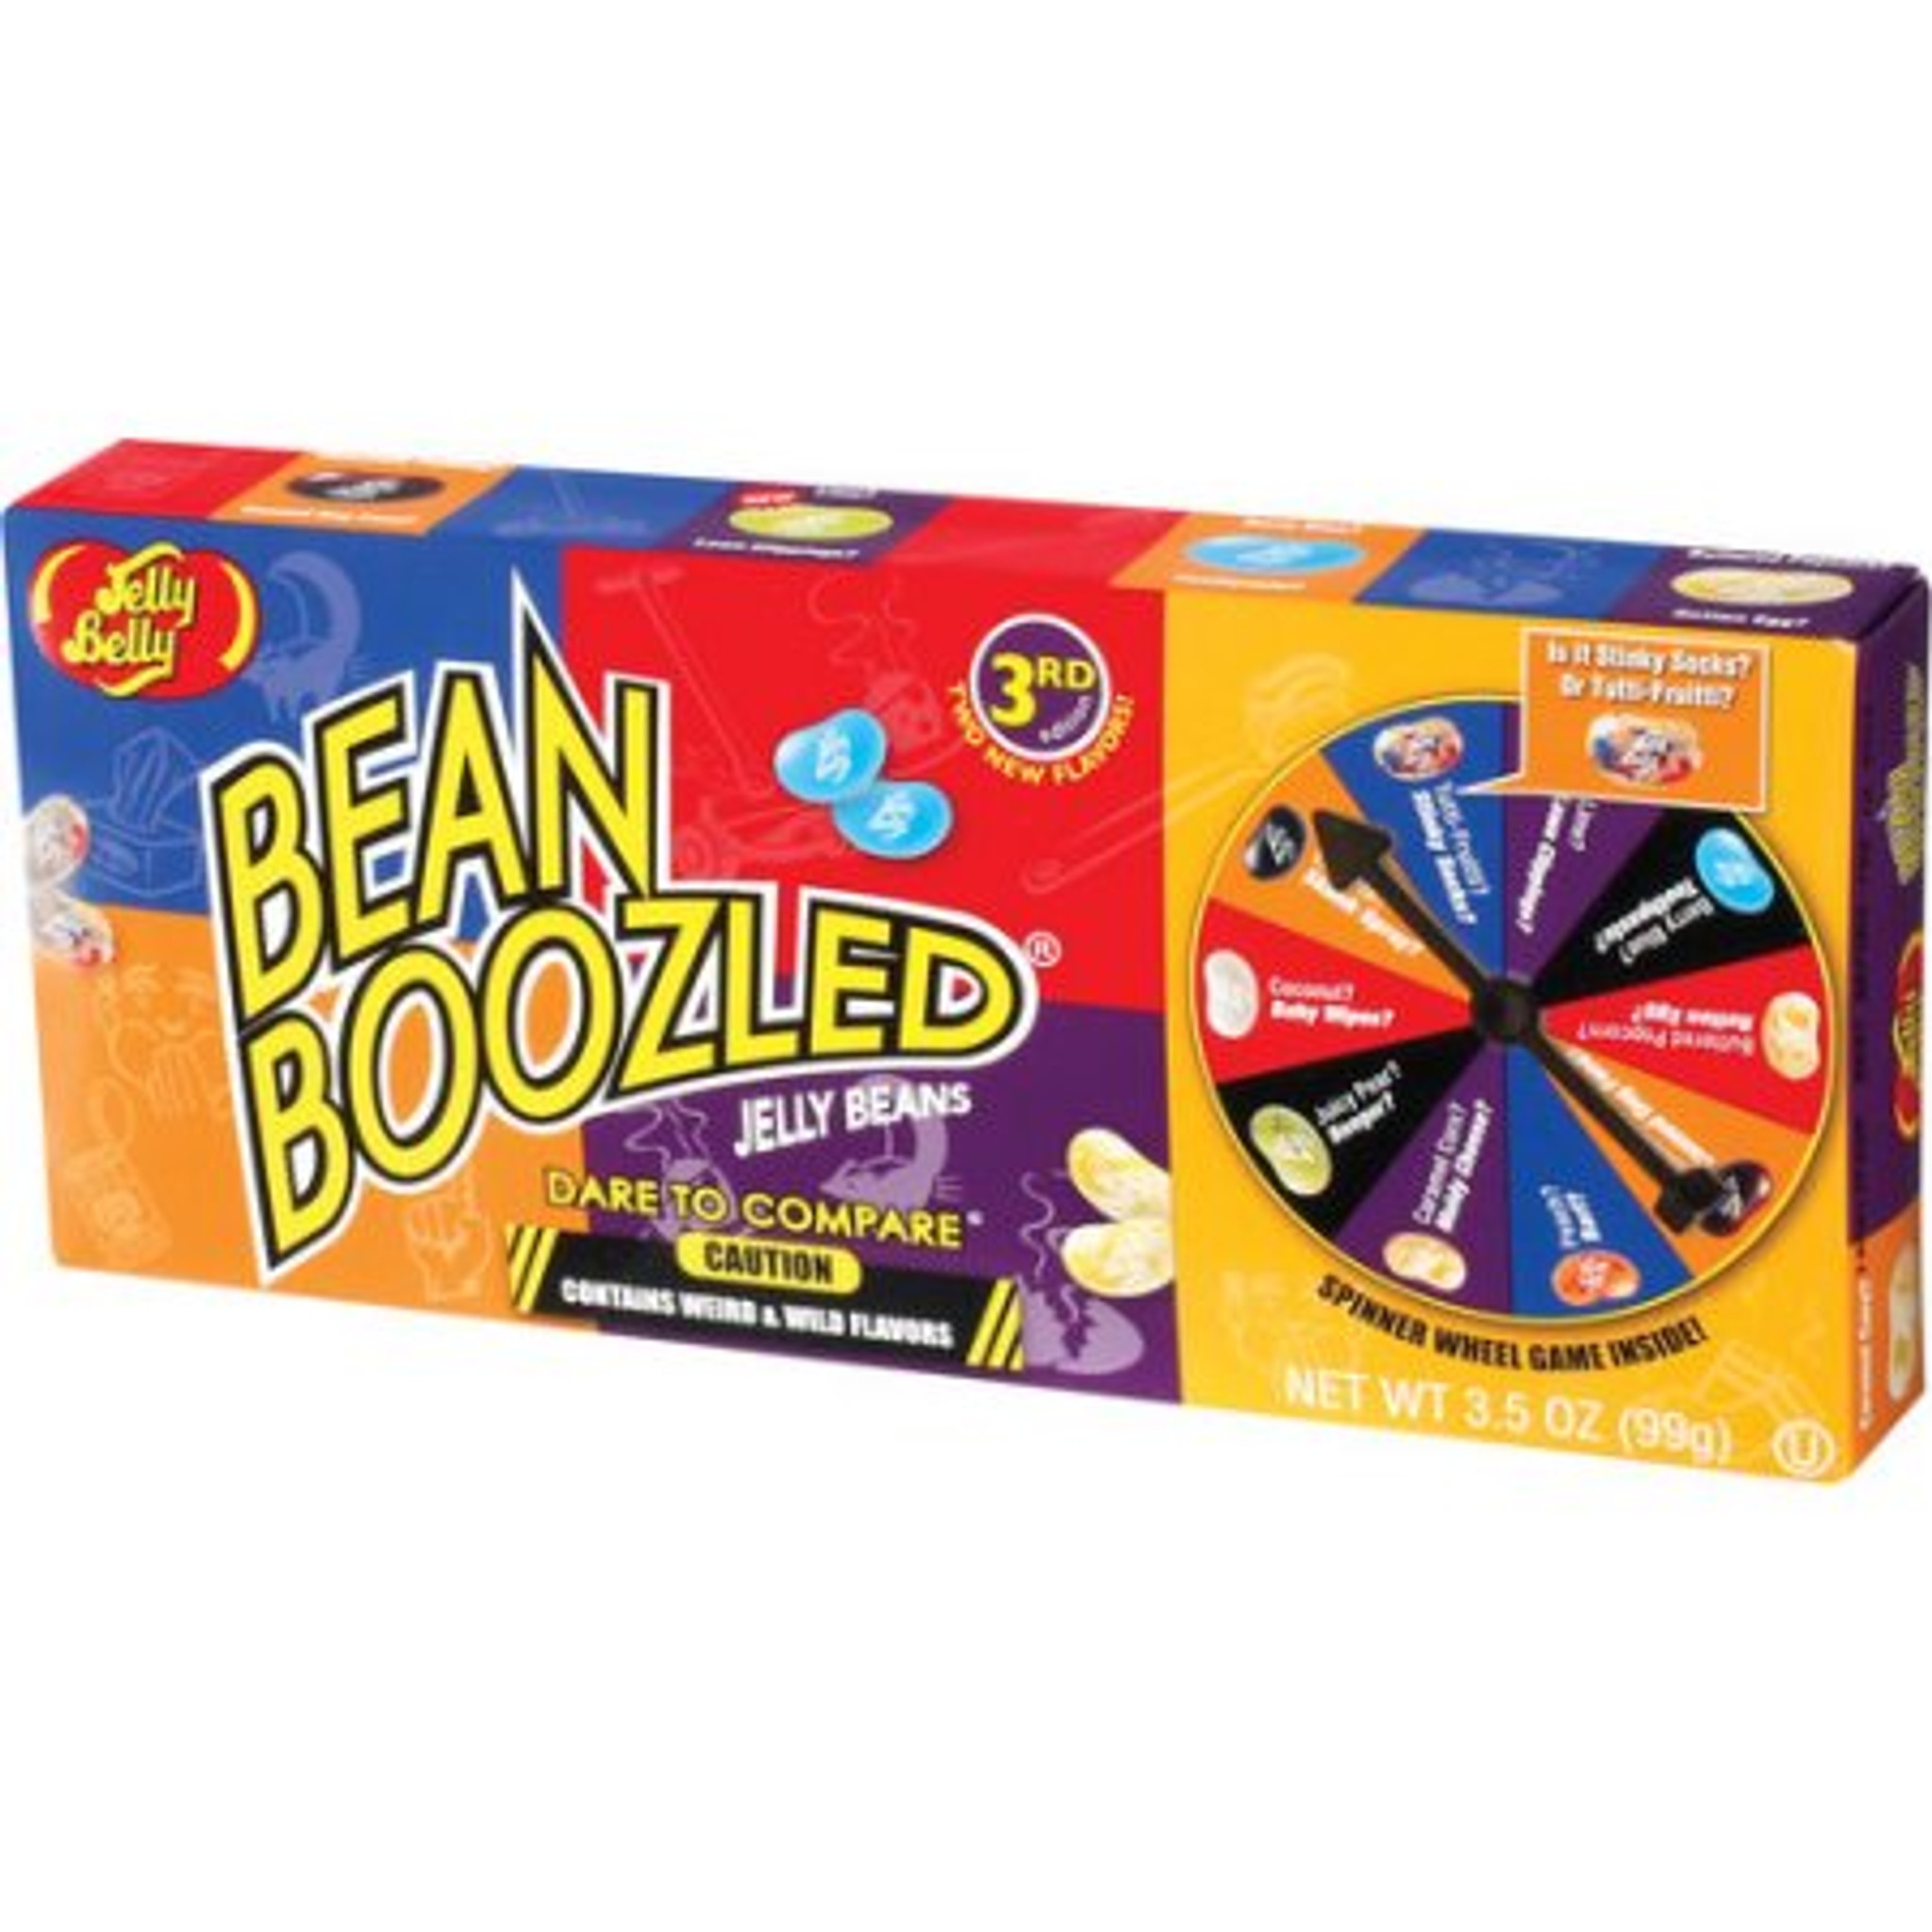 Jelly Belly Bean Boozled Spinner Gift Set - The Smiley Barn